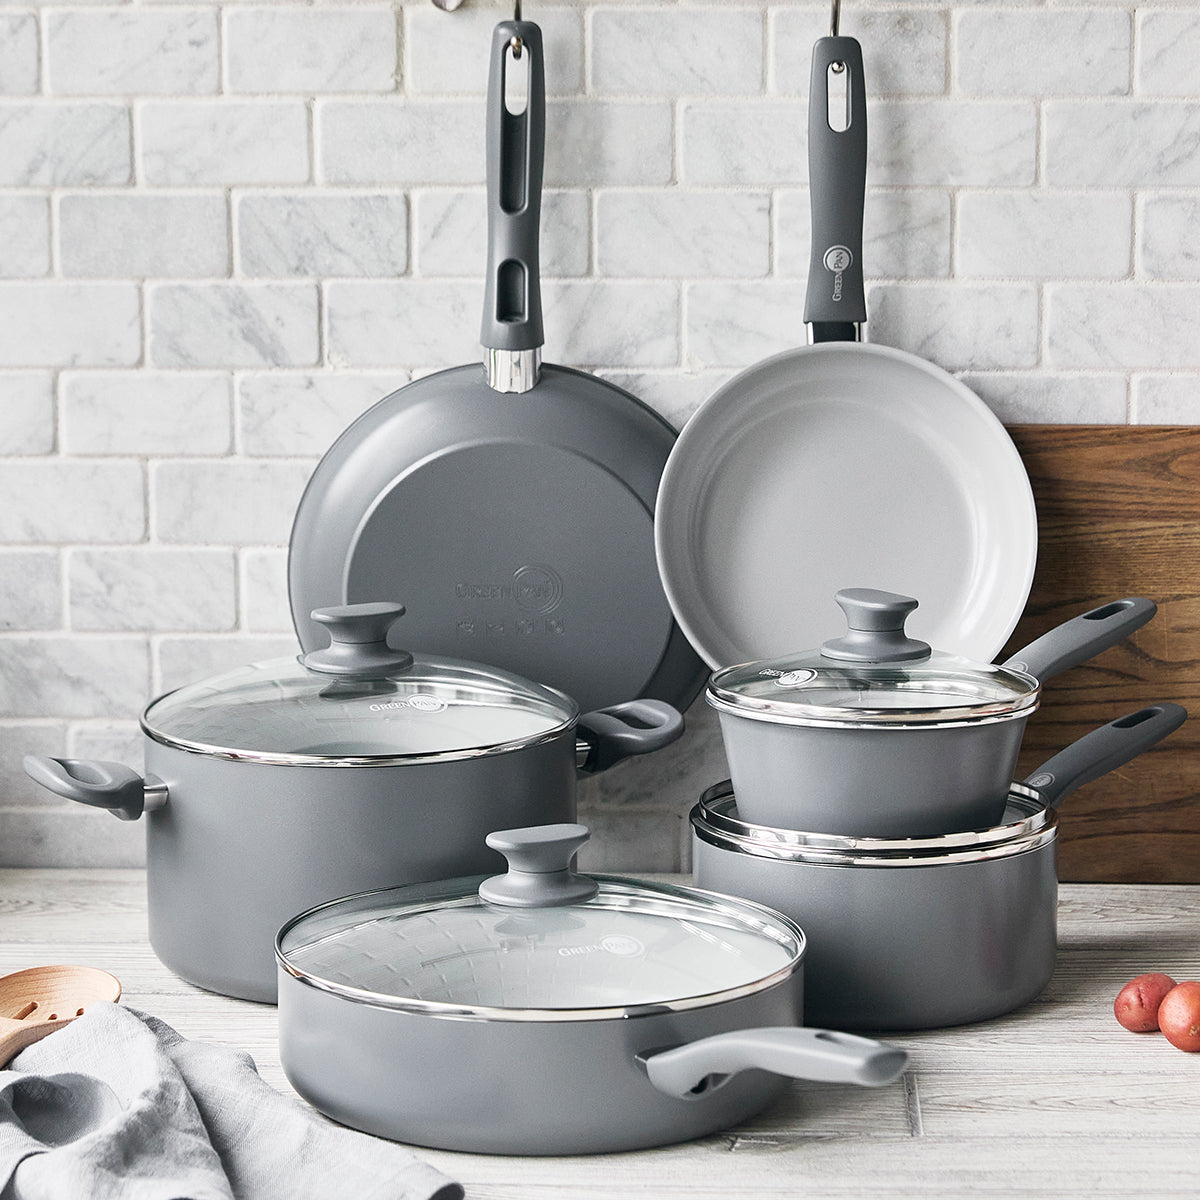 New in Box Excel Steel 5 Piece 18/10 Stainless Steel Cookware Set